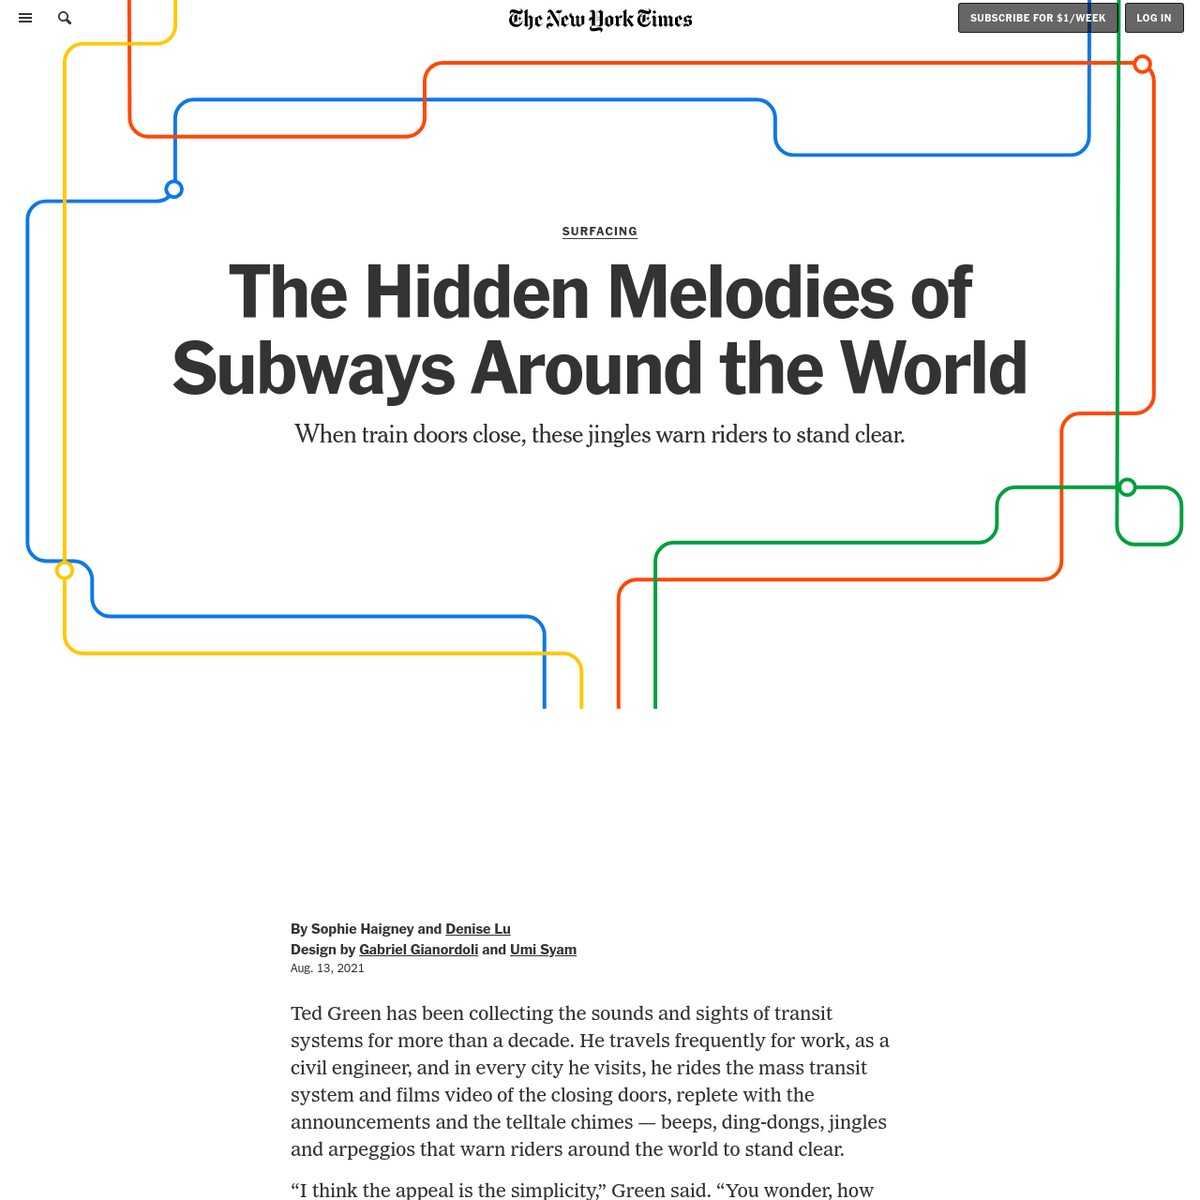 The Hidden Melodies of Subways Around the World - The New York Times